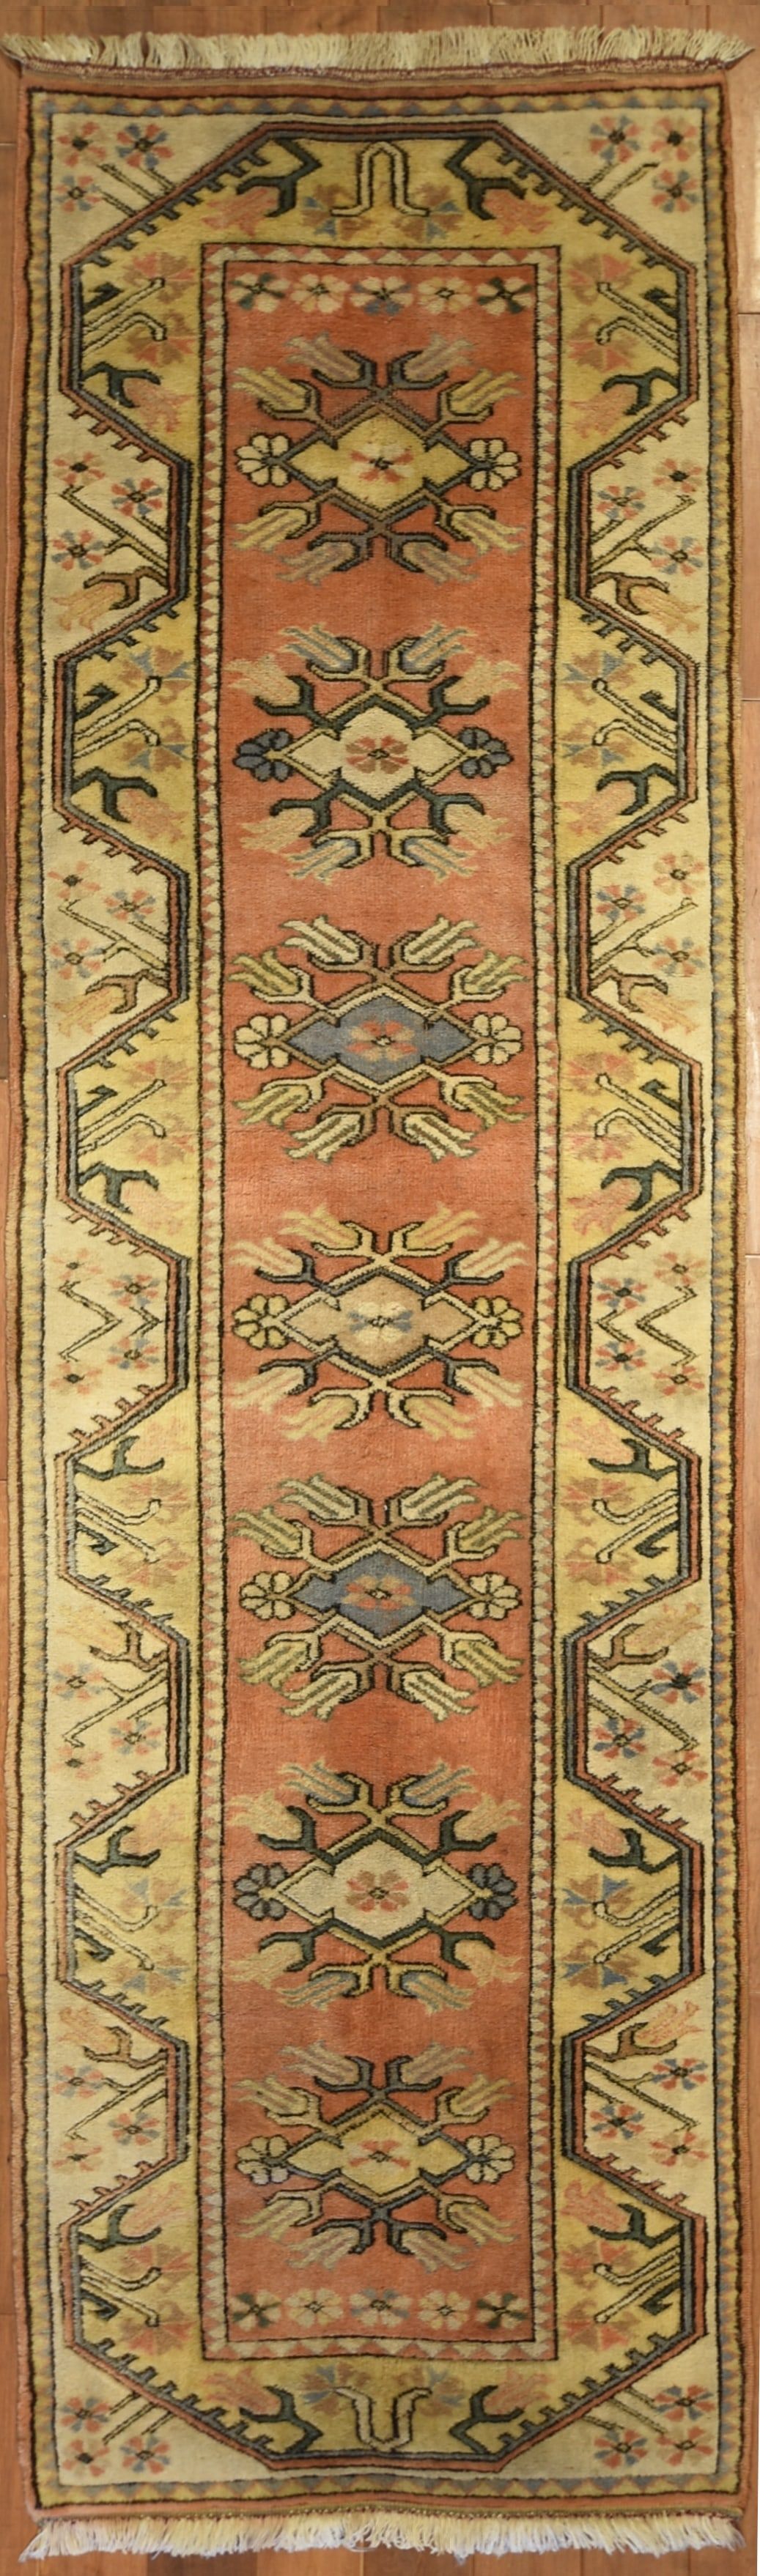 A CAUCASIAN STYLE RUNNER POST 2fb40ce